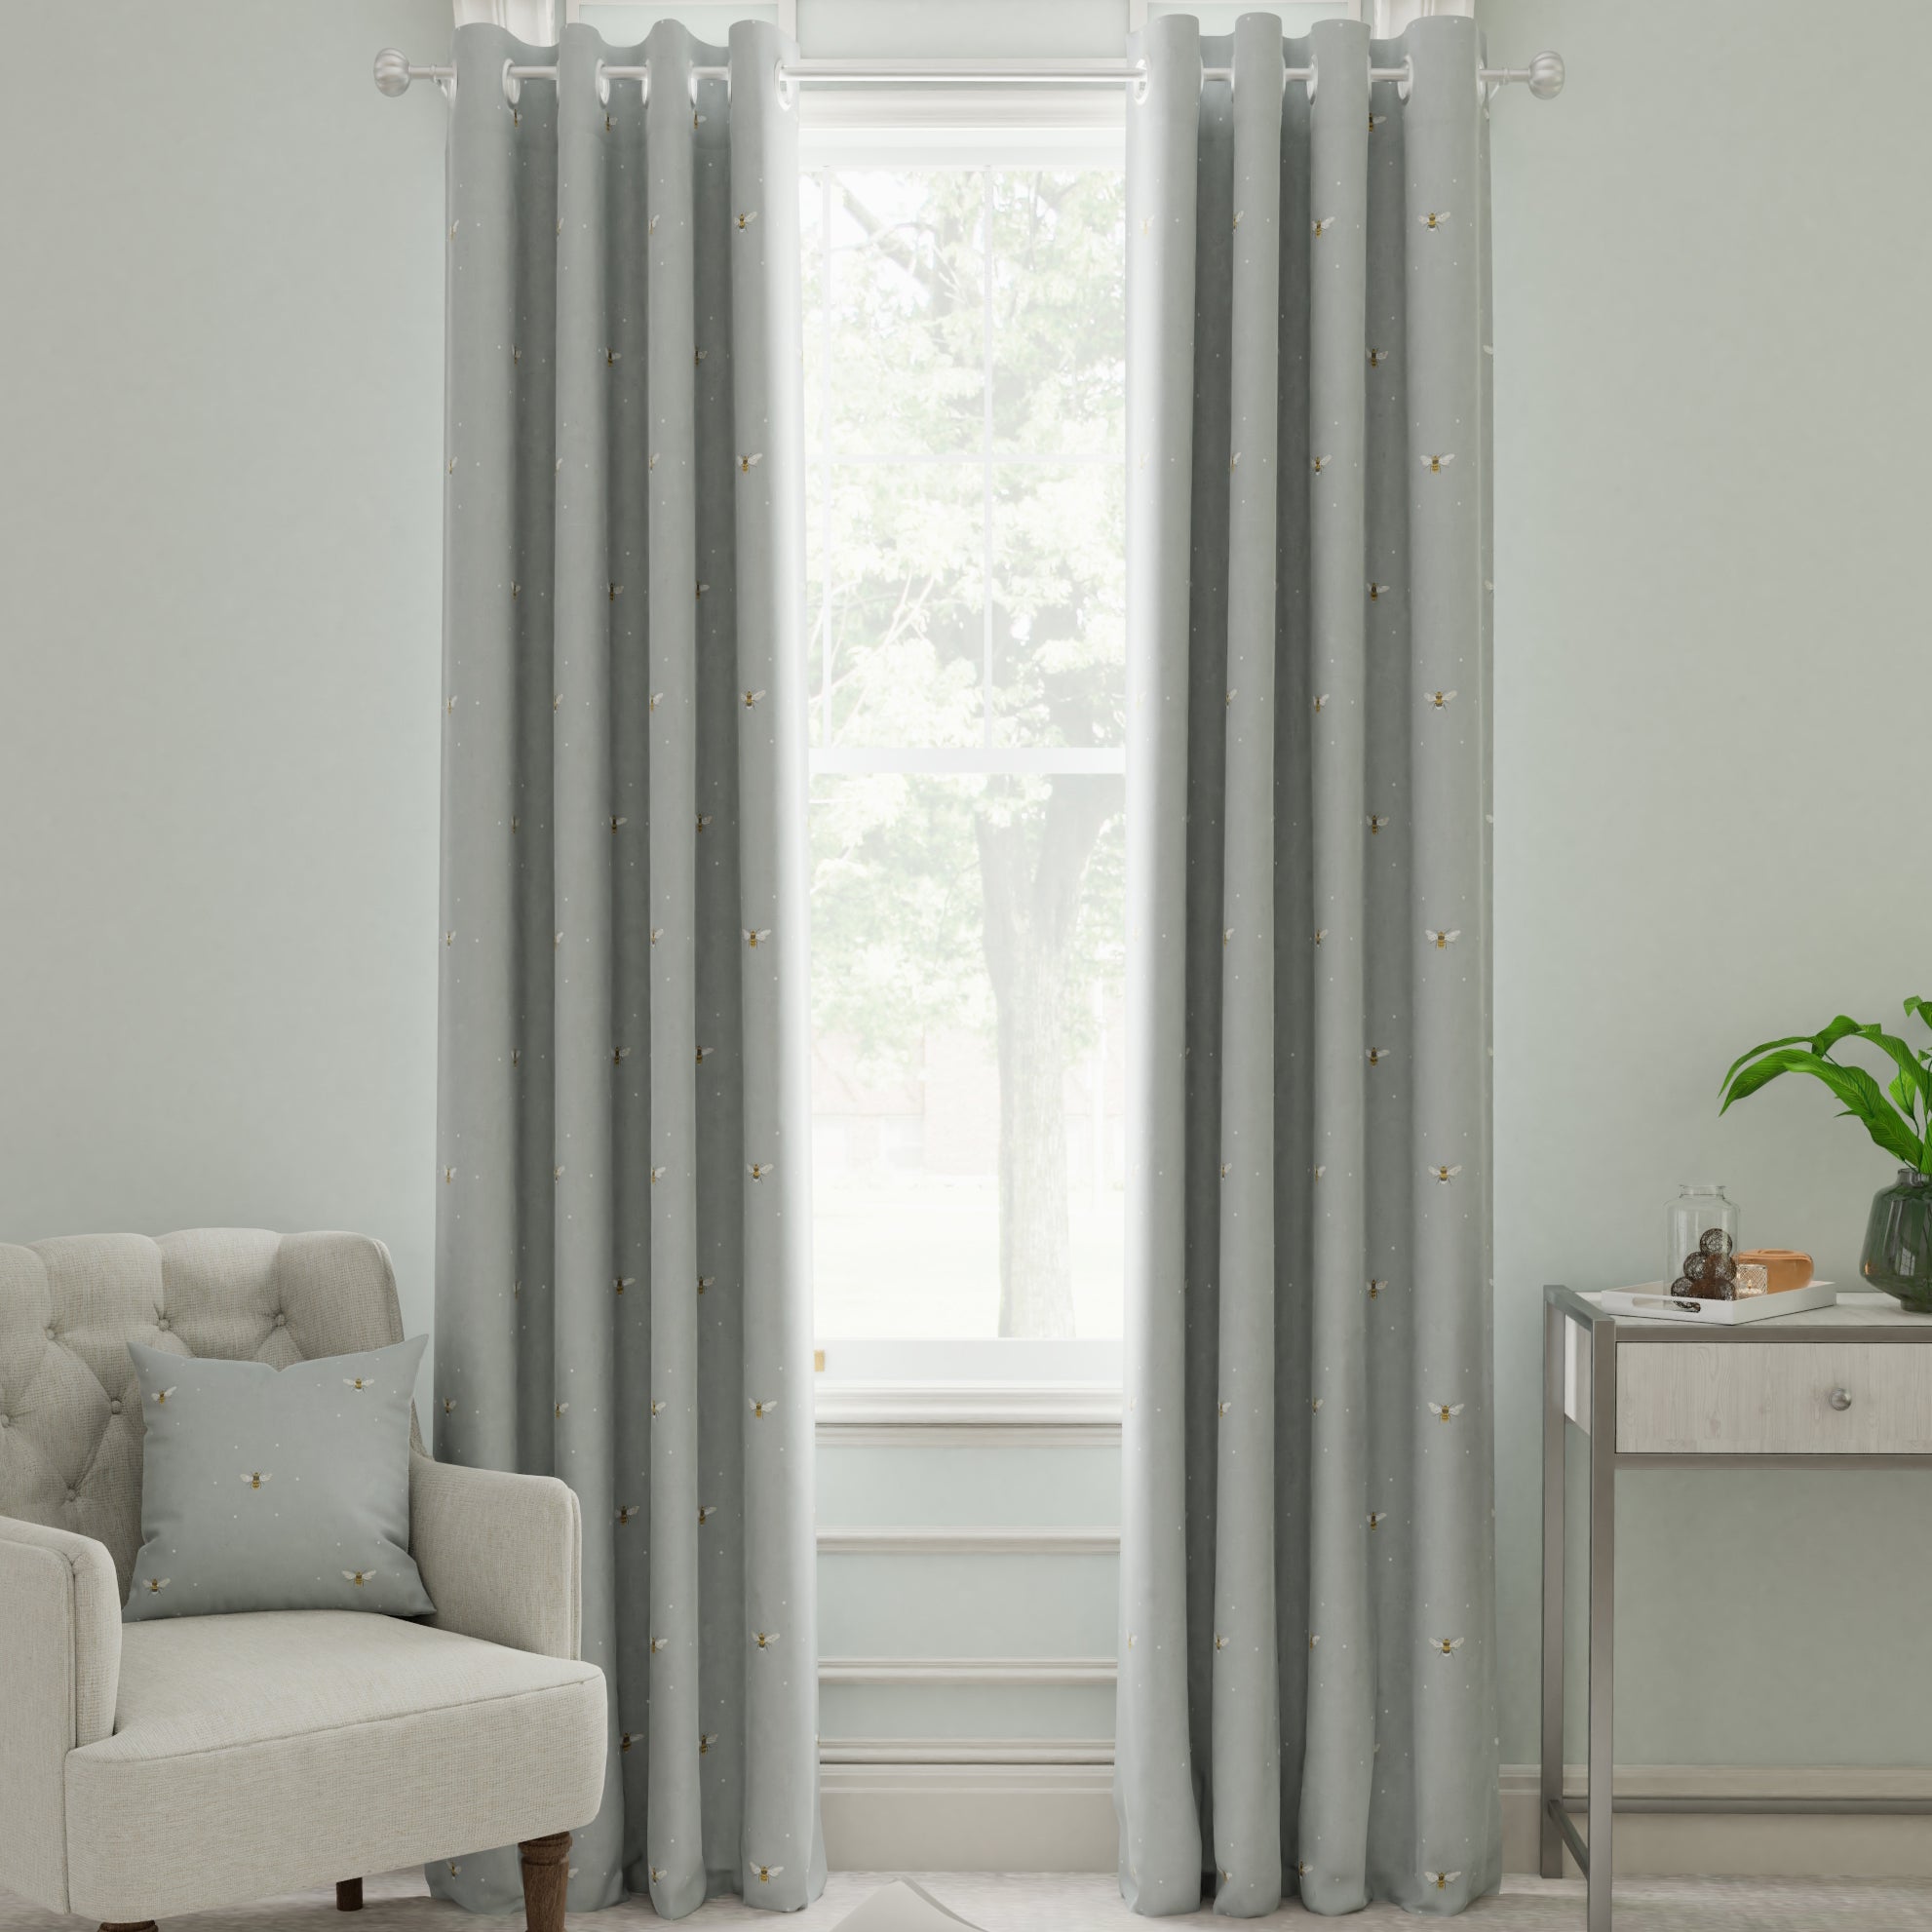 Sophie Allport Bees Made To Measure Curtains Pale Slate